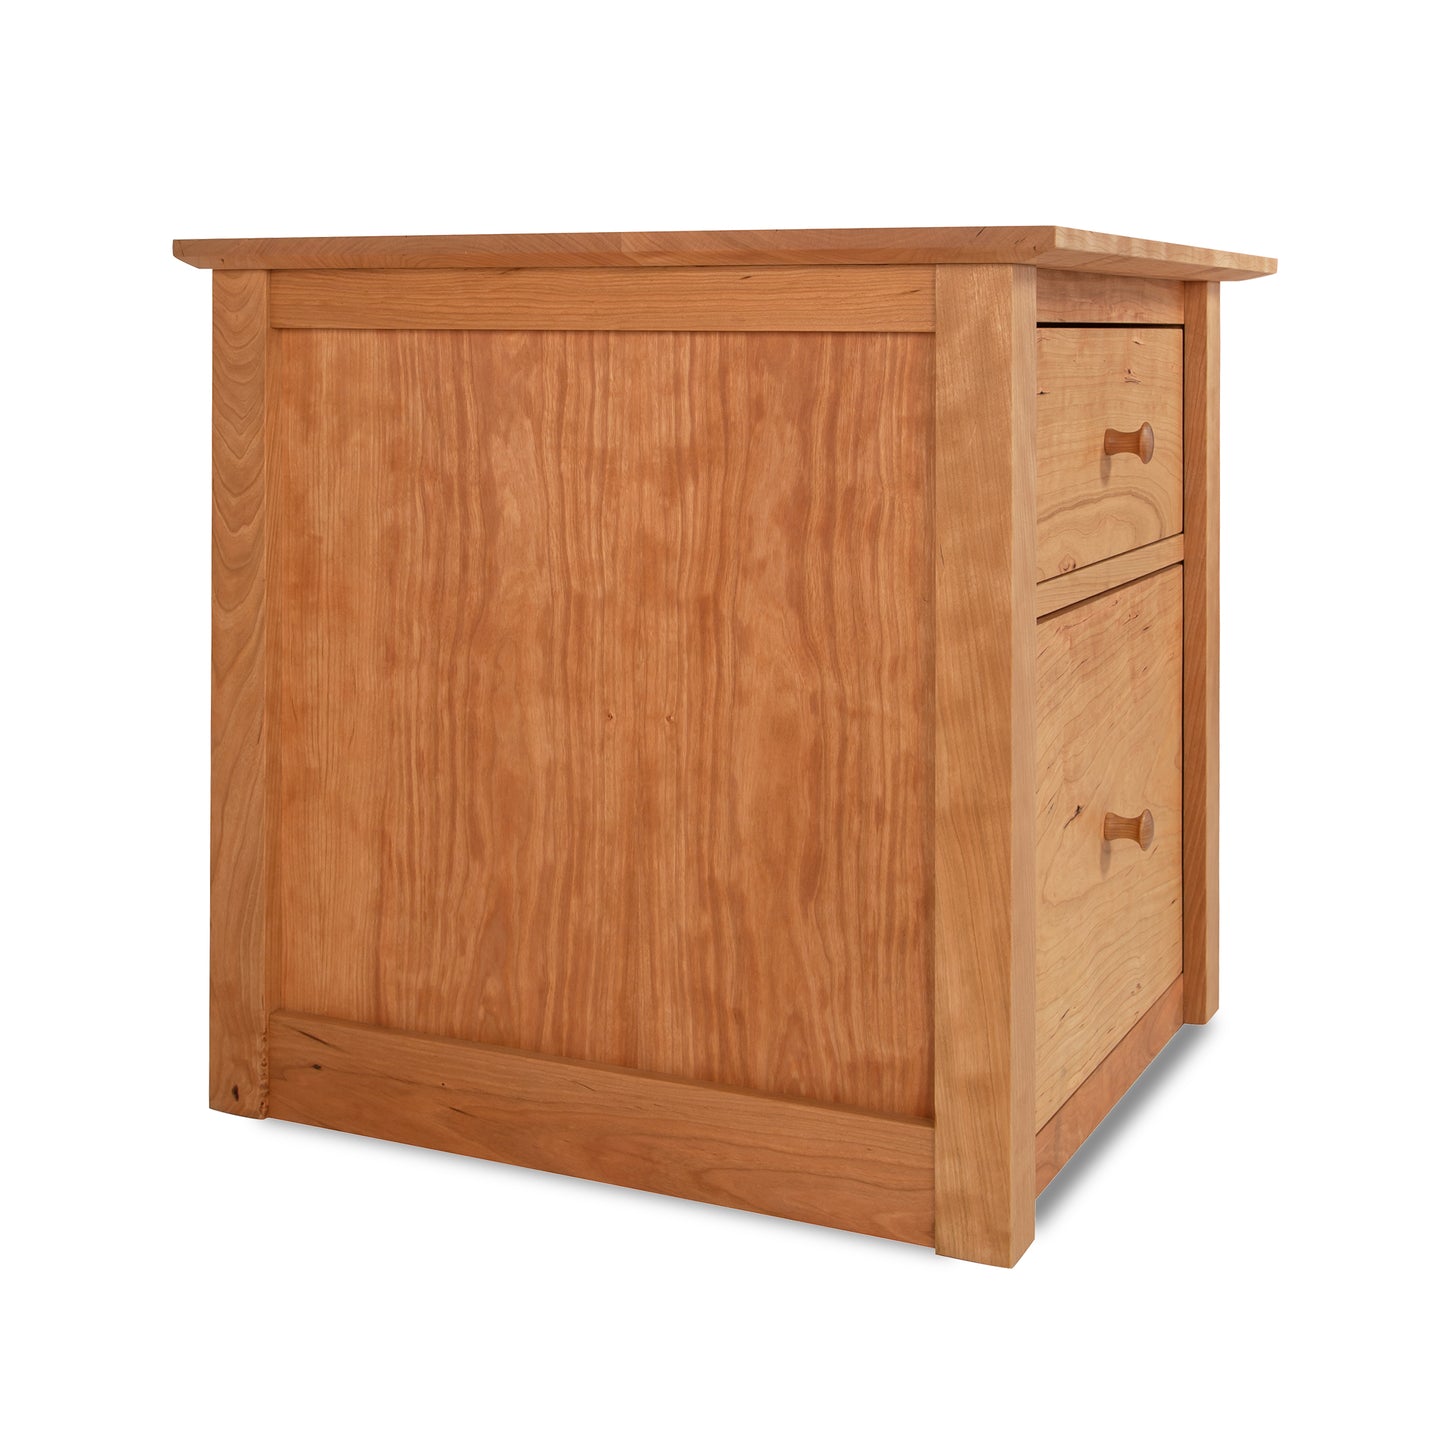 American Shaker File Cabinet by Maple Corner Woodworks, with one drawer and a single door, isolated on a white background.